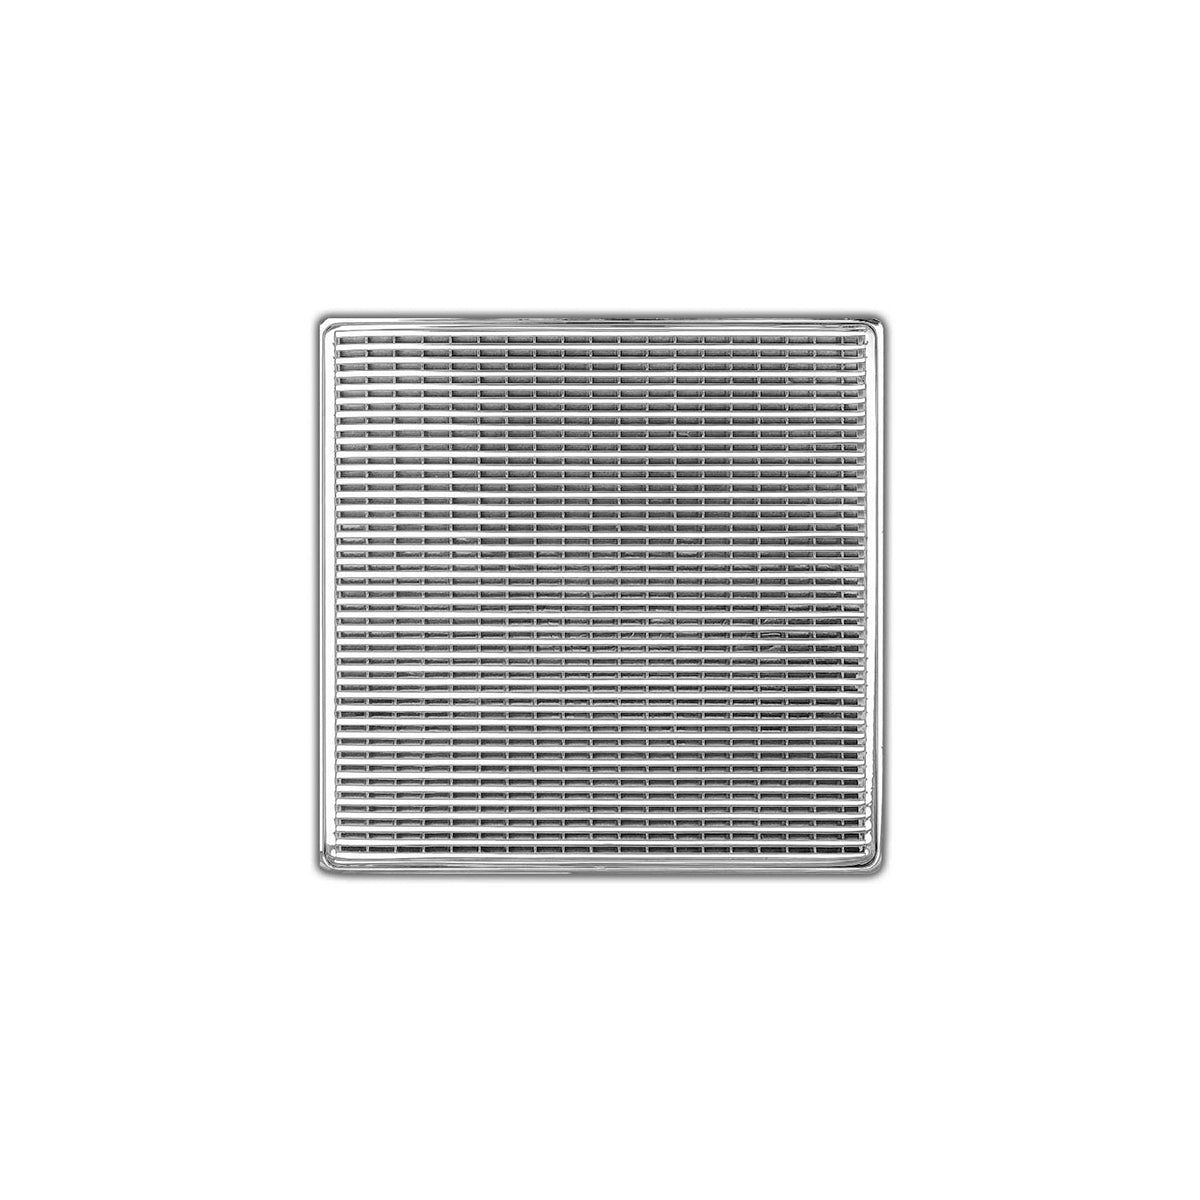 Infinity Drain 5" x 5" WD 5 Premium Center Drain Kit with Wedge Wire Pattern Decorative Plate with Cast Iron Drain Body, 2" Outlet